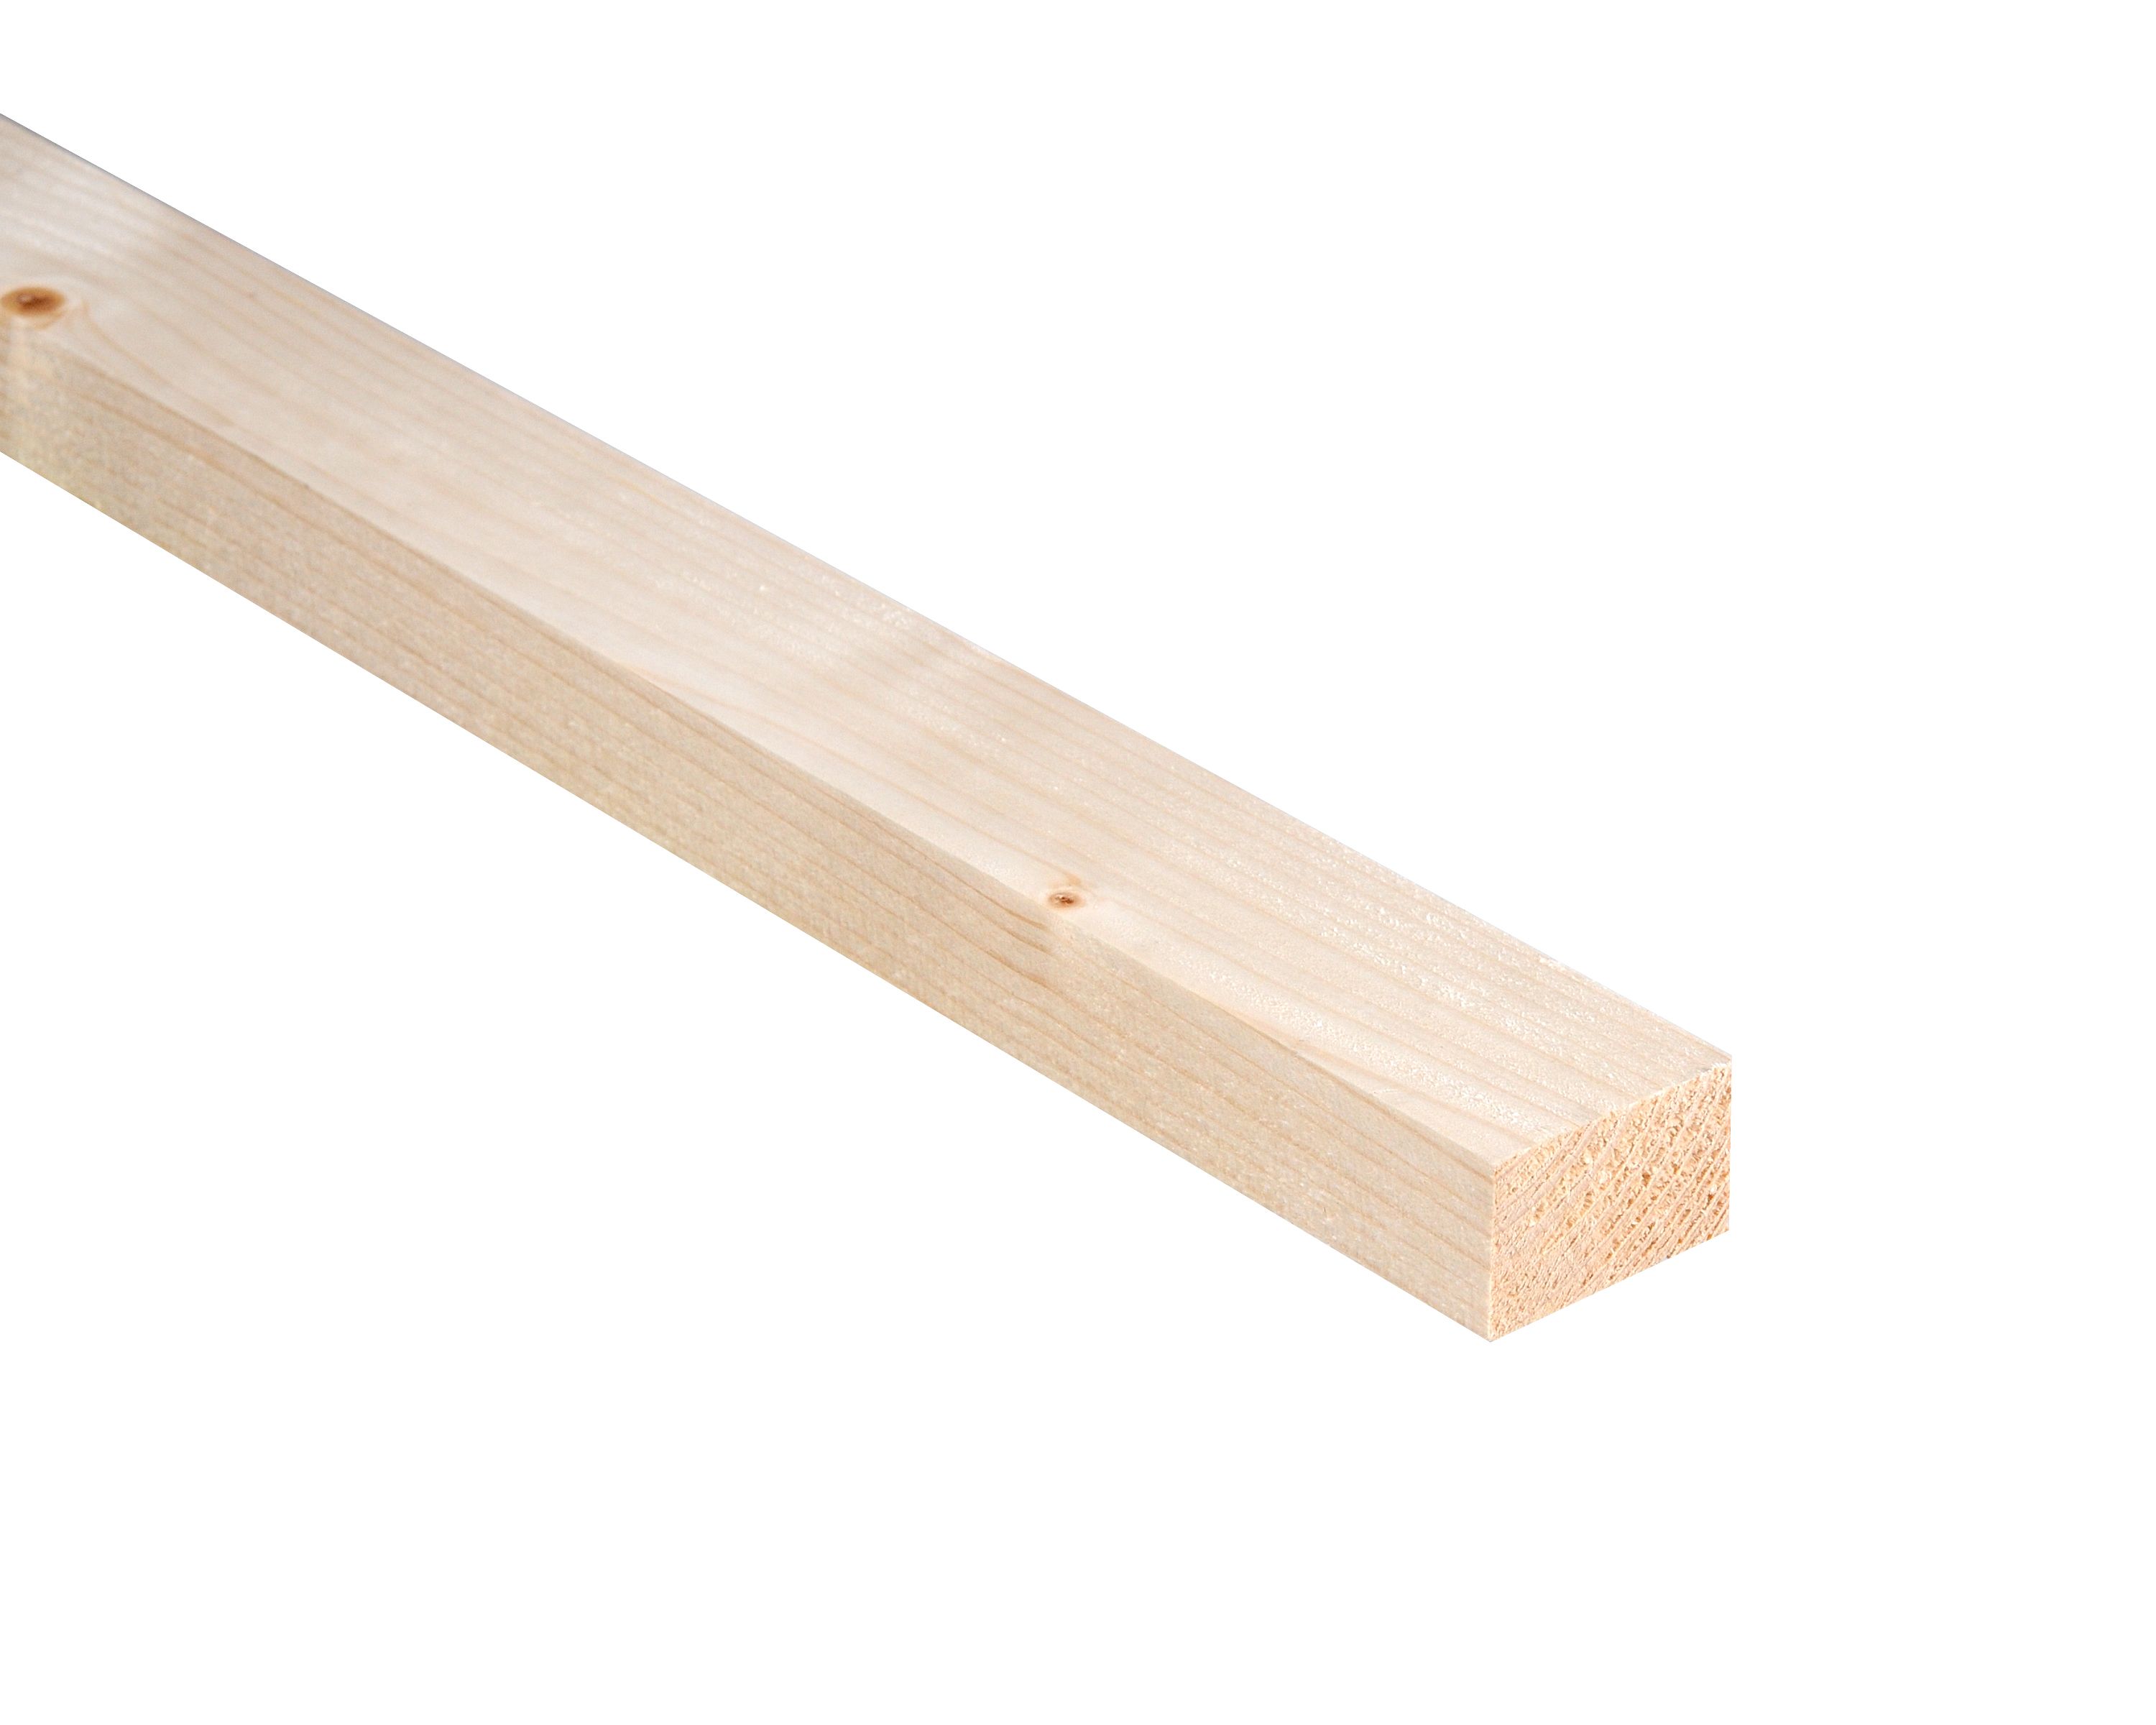 Rough Sawn Stick timber (L)2.4m (W)75mm (T)47mm, Pack of 4